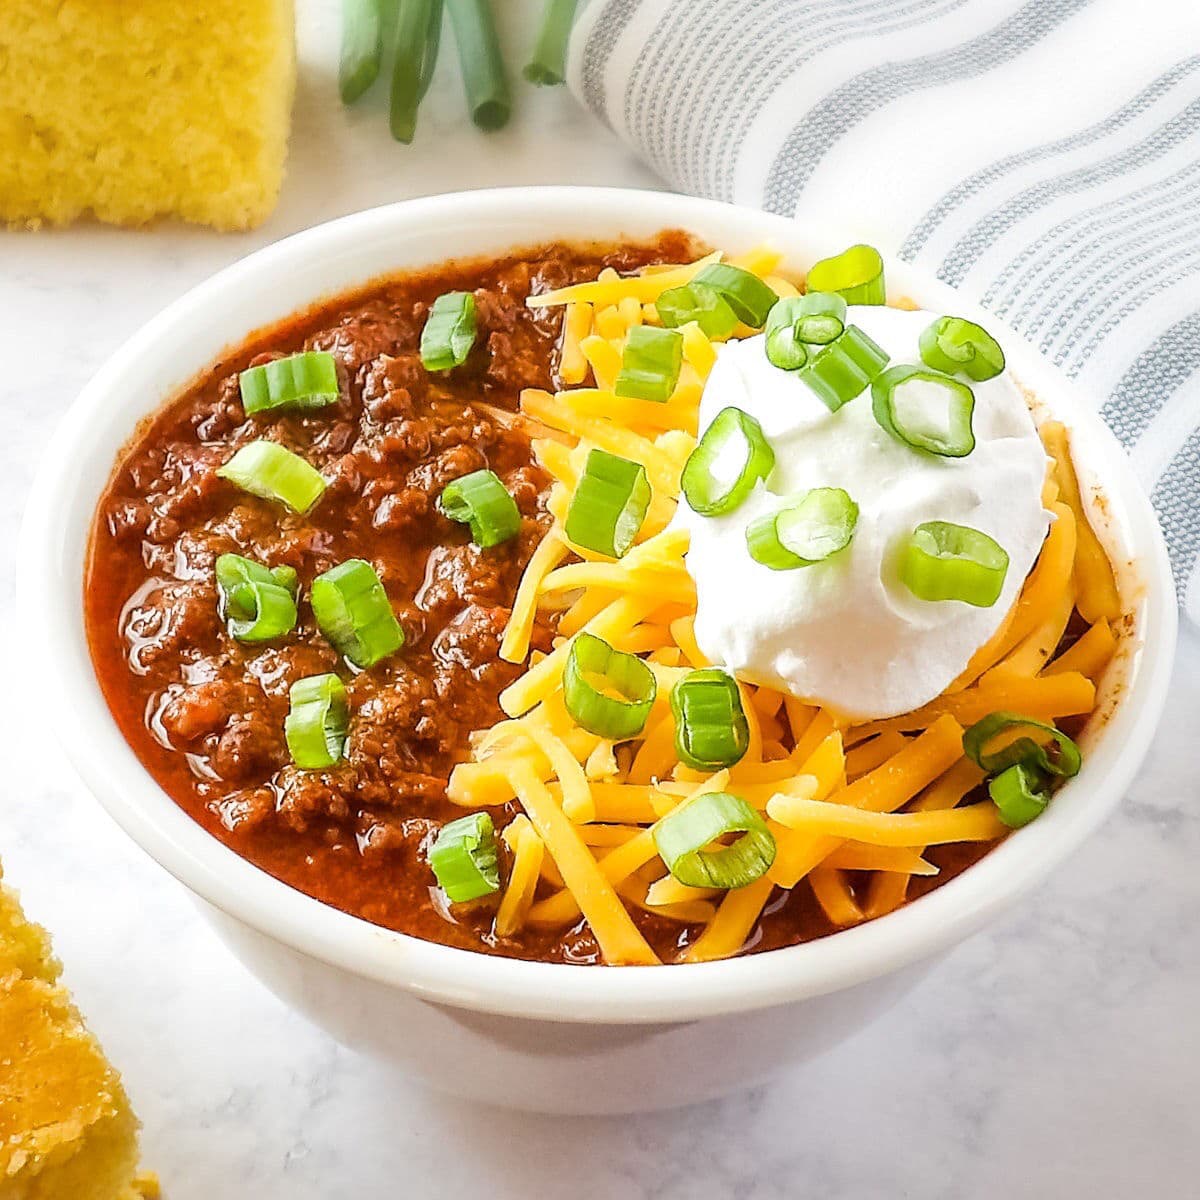 Slow Cooker Venison Chili (deer chili) in a white bowl with cornbread and green onions.